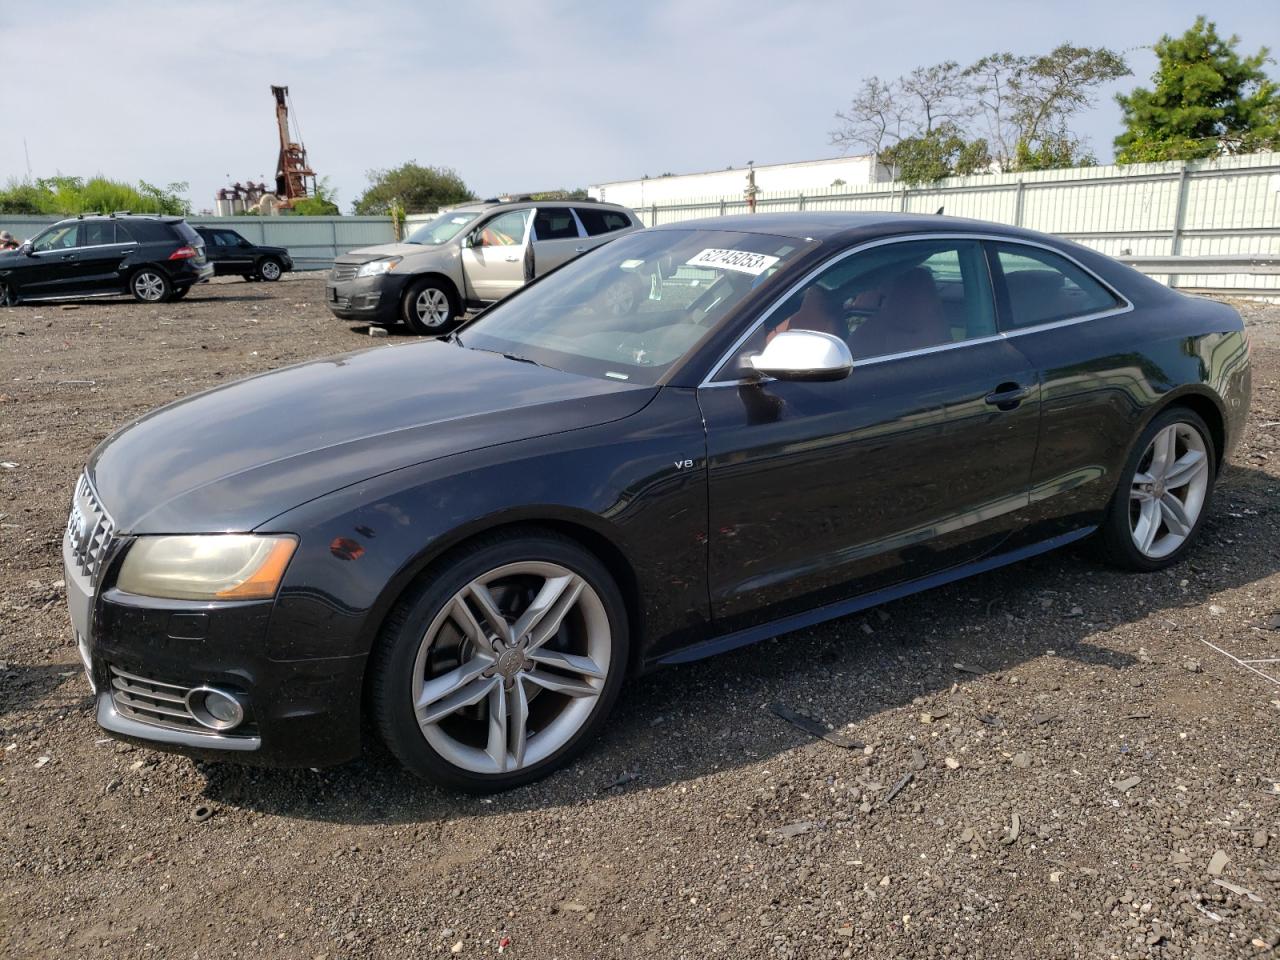 vin: WAUCVAFR5BA013279 WAUCVAFR5BA013279 2011 audi rs5 4200 for Sale in 11719 9203, Ny - Long Island, Brookhaven, USA